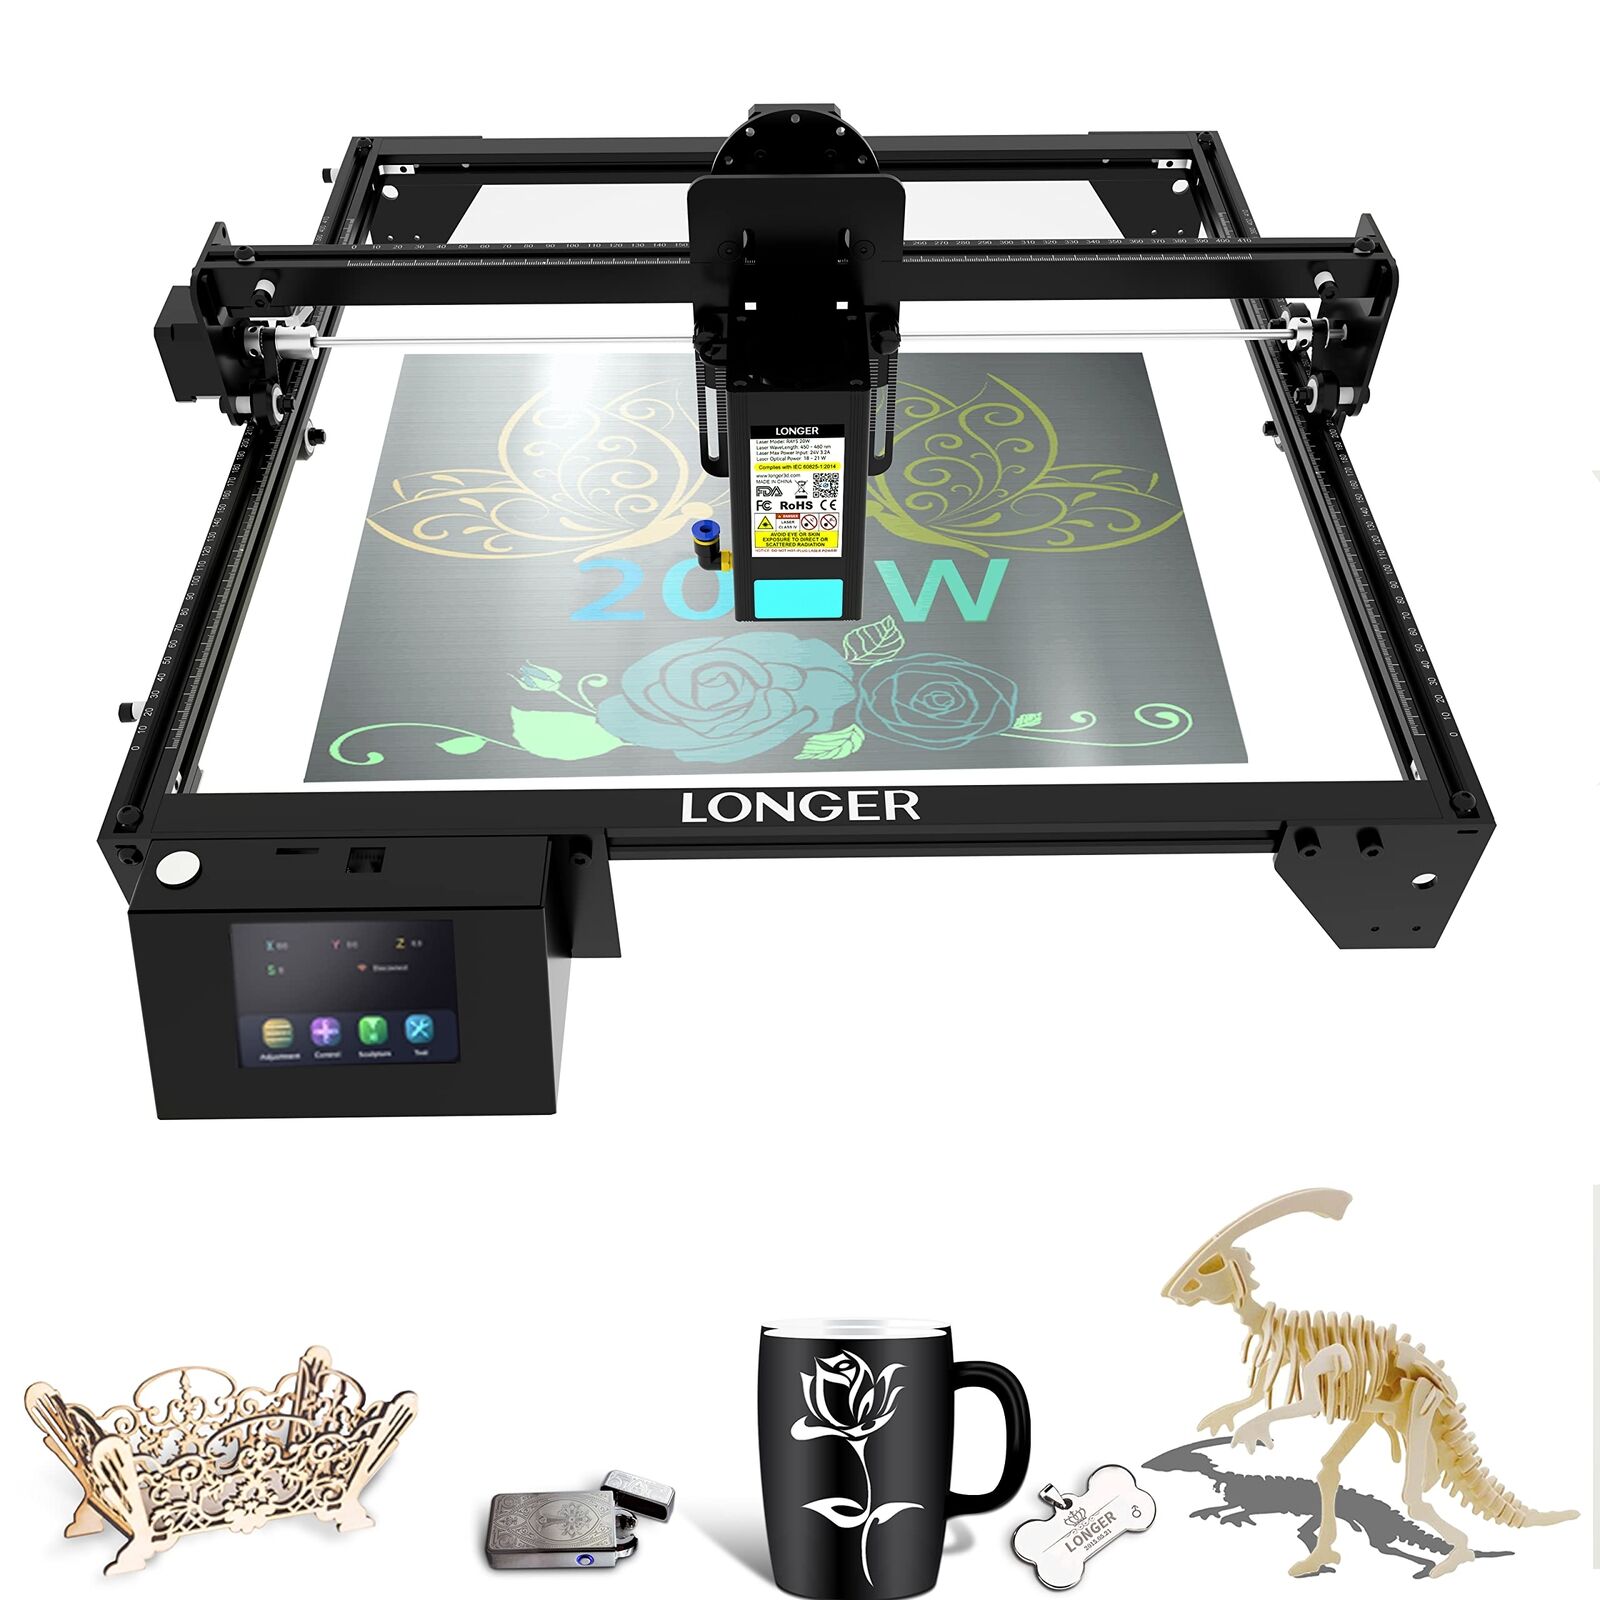 Longer RAY5 Laser Engraver 130W High-Precision Laser Engraving and Cutting(used)